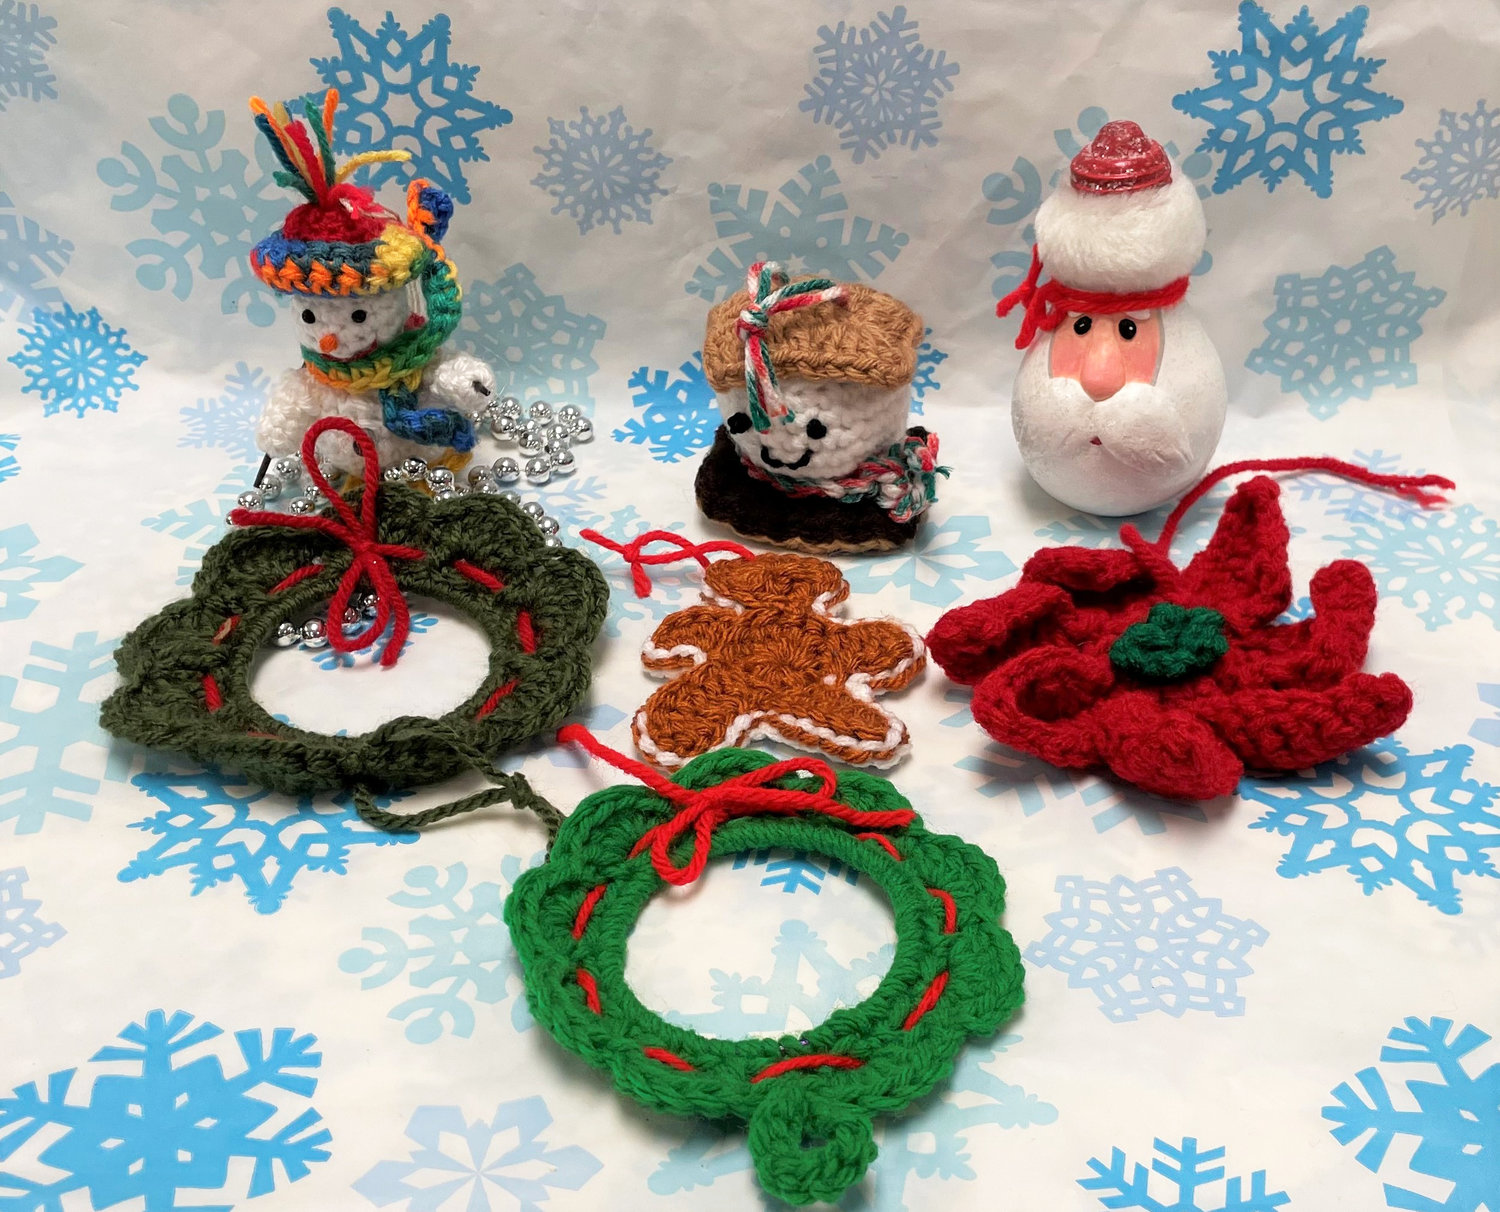 Ornaments made by older adults from Bucks County Senior Centers.